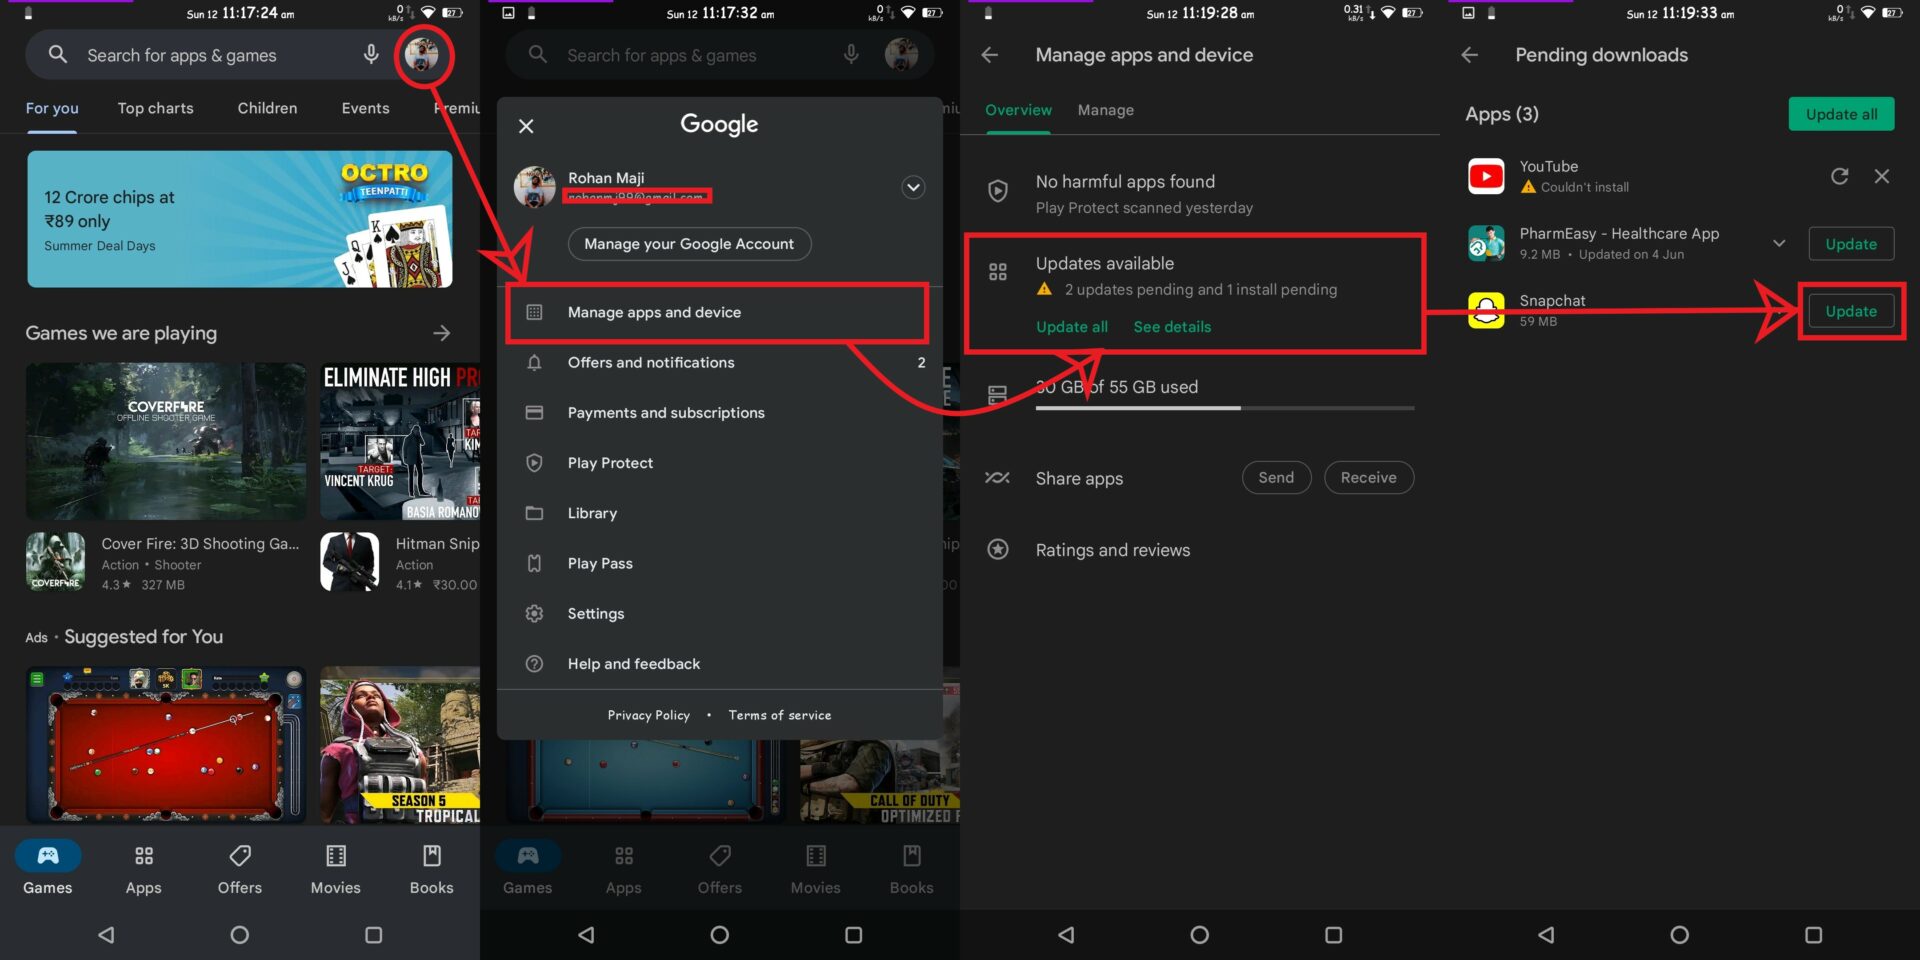 How to Update Snapchat in Android from Play Store